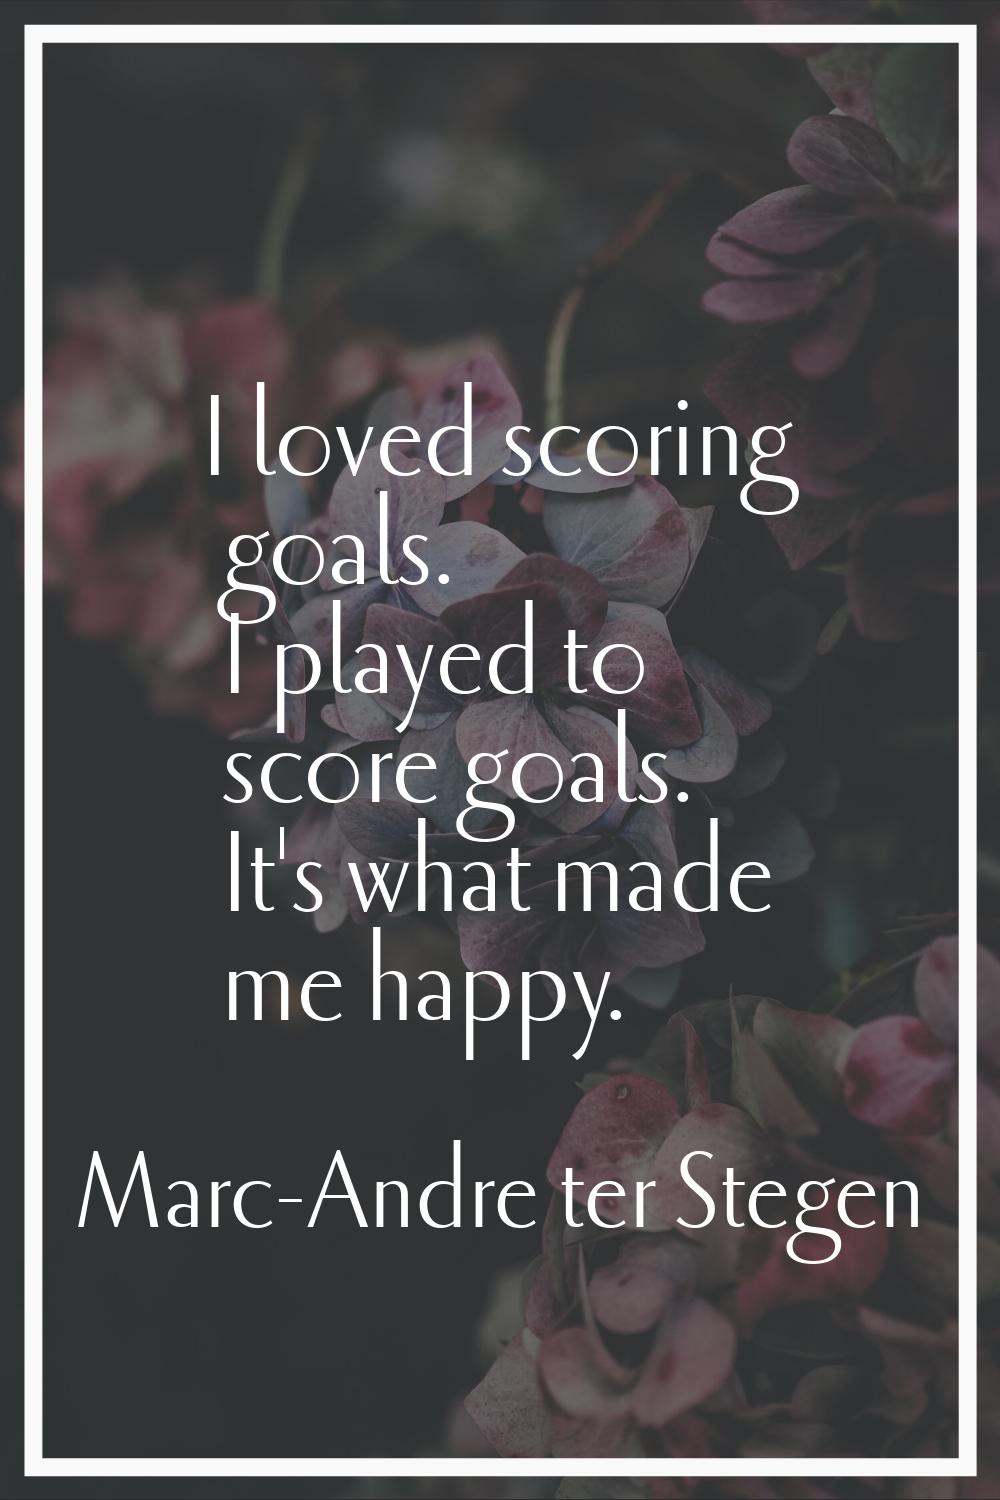 I loved scoring goals. I played to score goals. It's what made me happy.